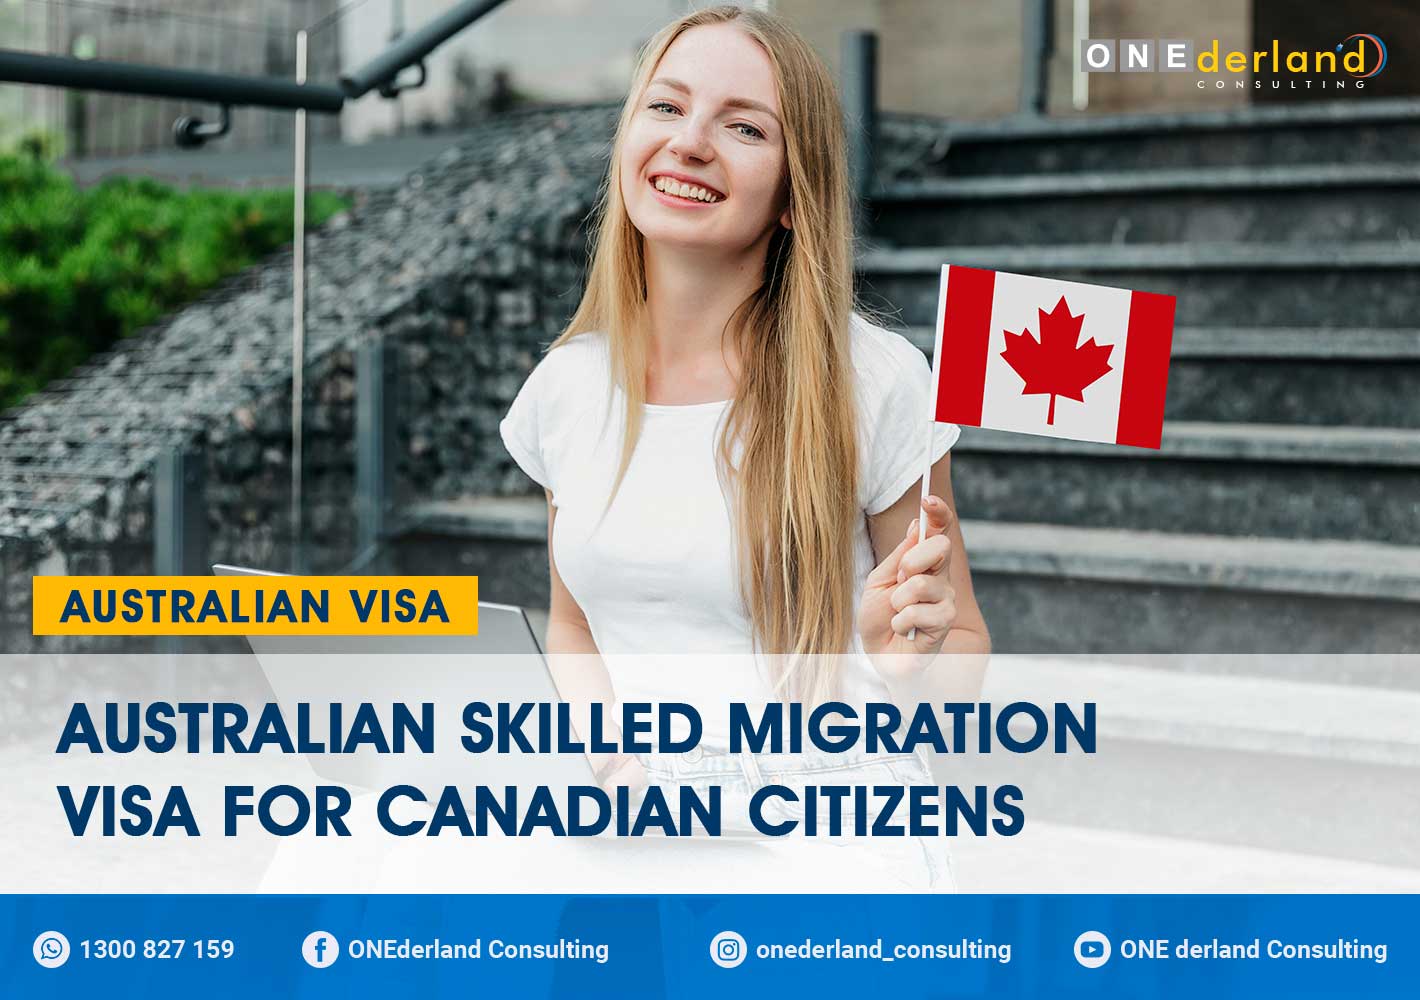 How to Obtain Australian Skilled Migration Visa as Canadian Citizens